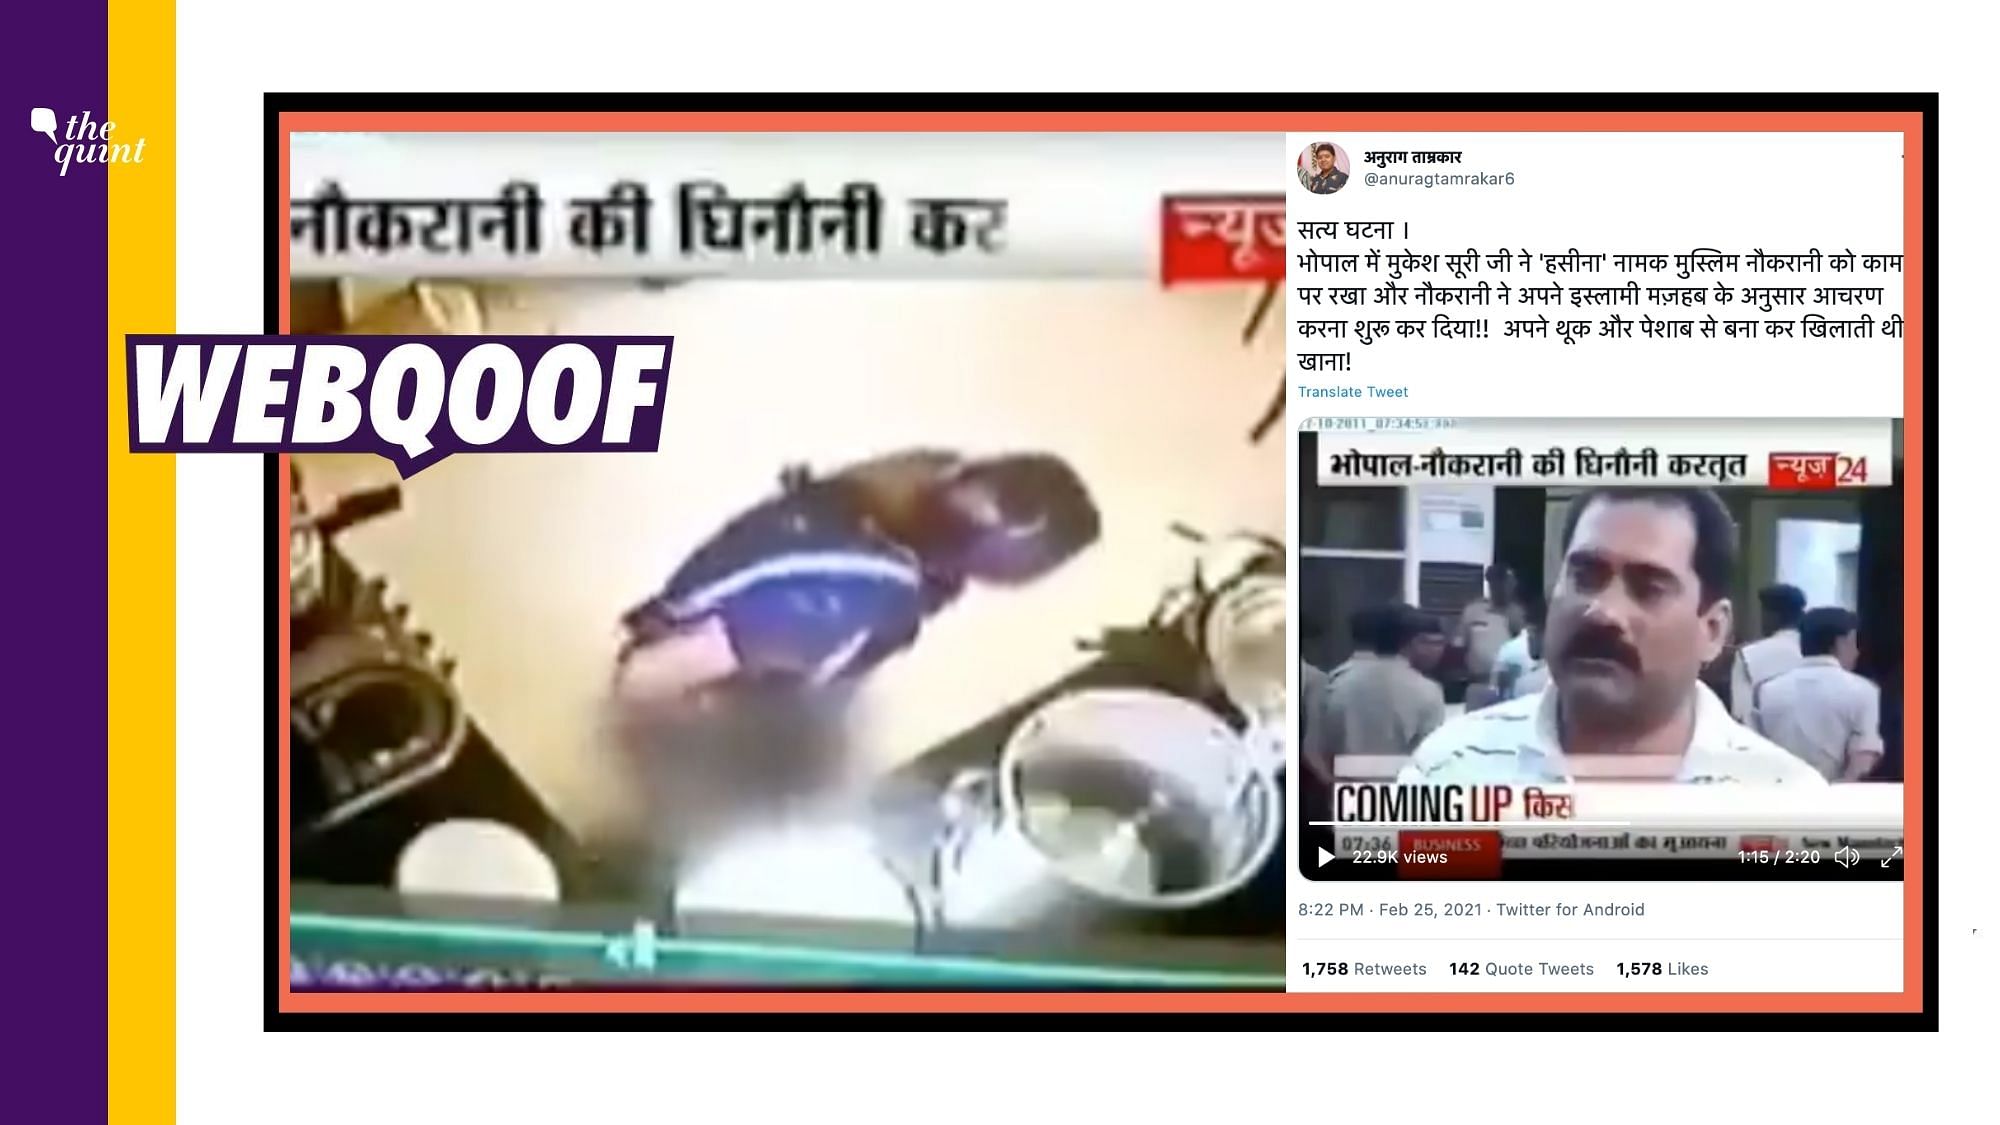 A viral video showing a domestic help allegedly contaminating food by mixing urine in Madhya Pradesh’s Bhopal is being shared with a false communal spin.